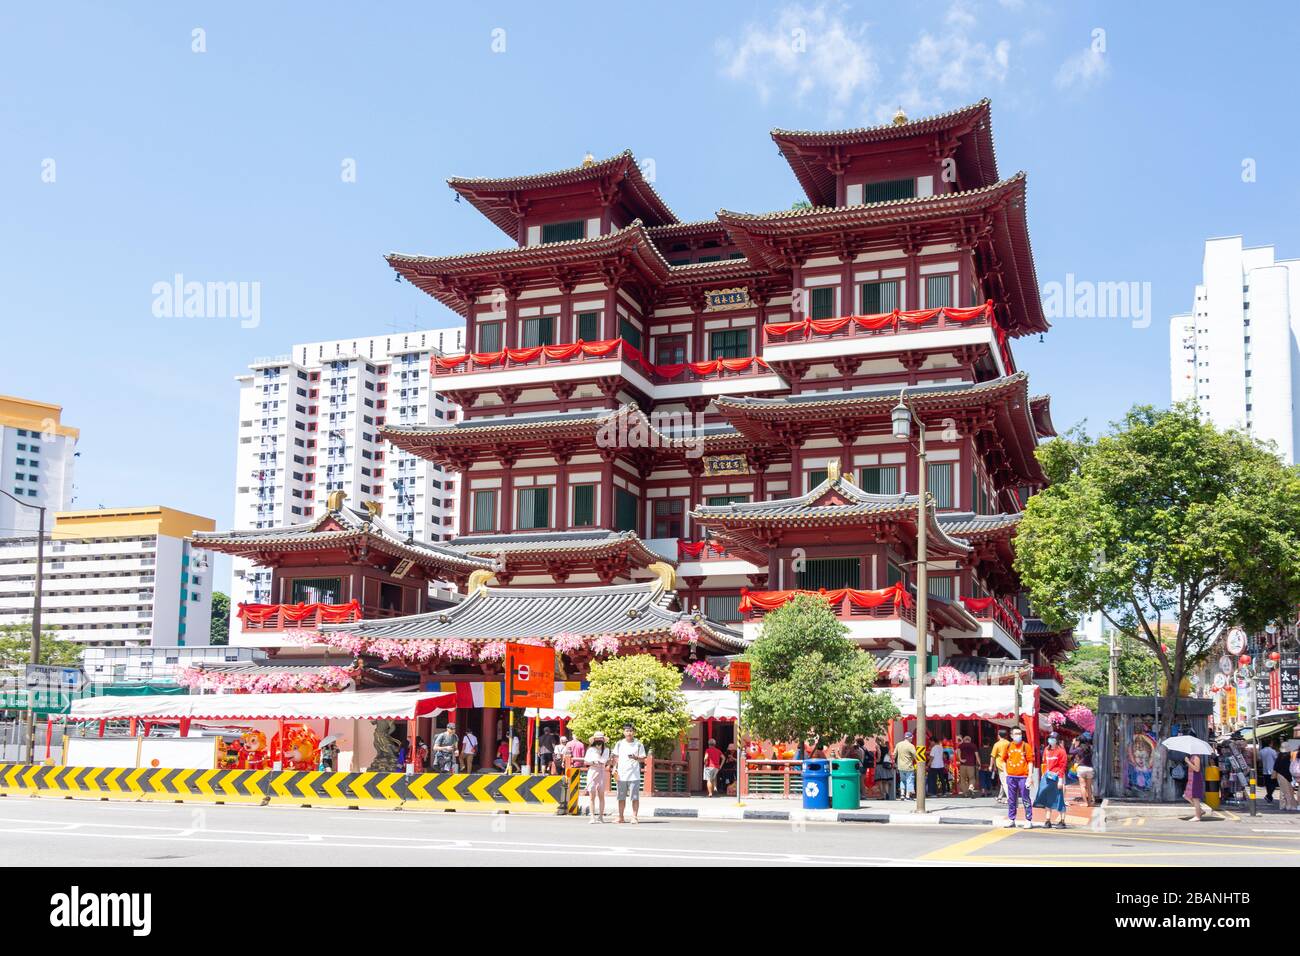 Buddha Tooth Relic Temple, South Bridge Road, Chinatown, Outram District, Central Area, Singapore Island (Pulau Ujong), Singapur Stockfoto